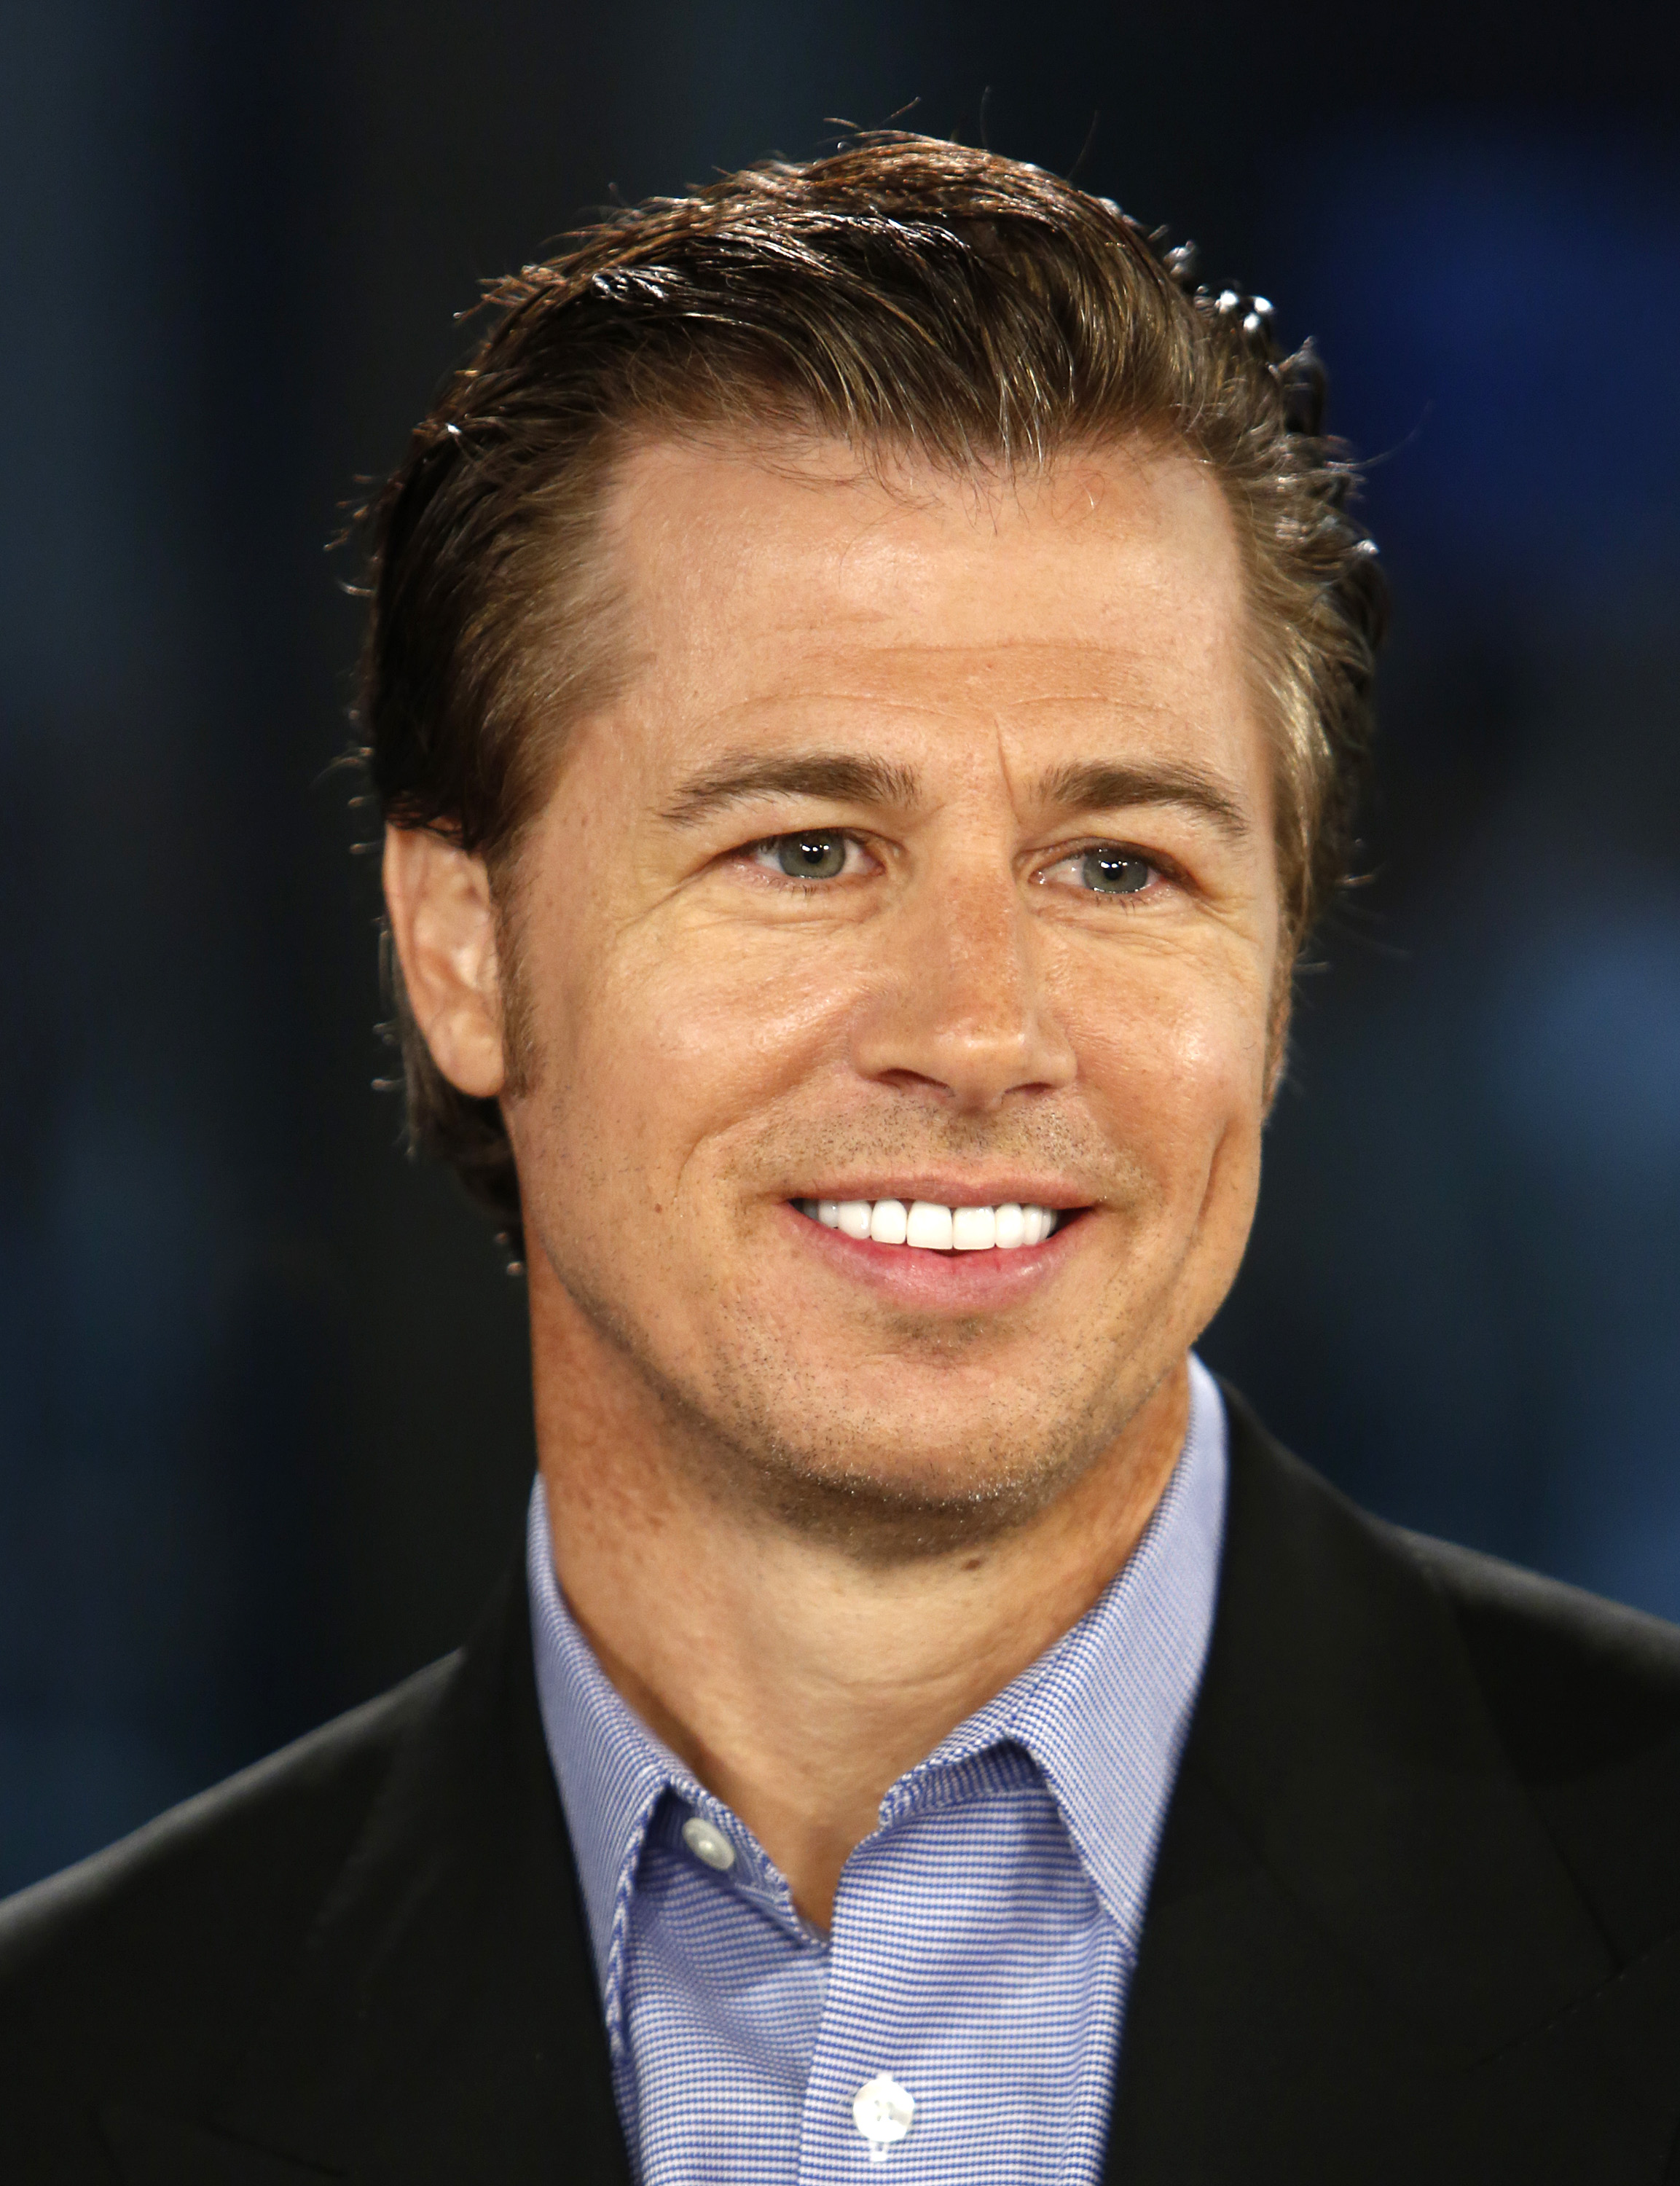 Doug Pitt photographed during his appearance on NBC News | Source: Getty Images